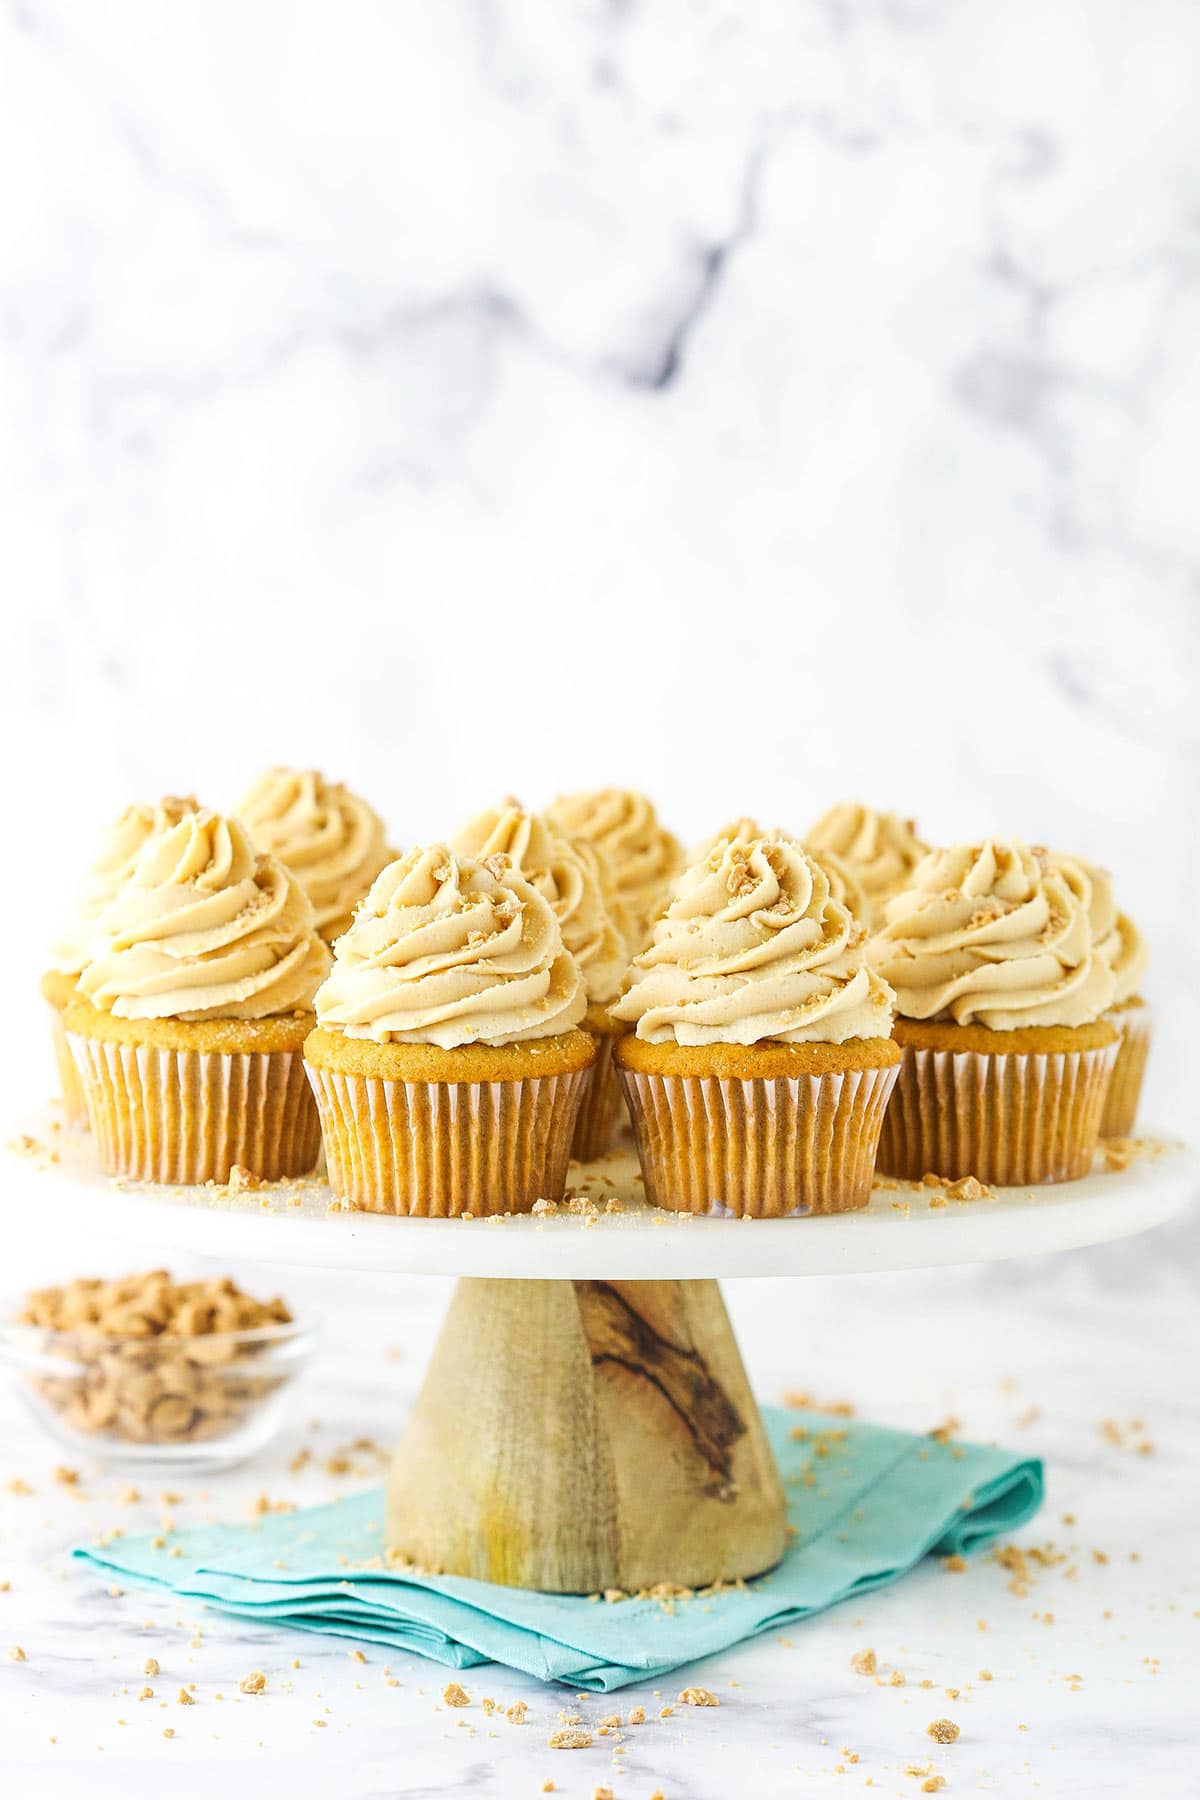 Twelve peanut butter cupcakes arranged on a cake stand with a bowl of peanut butter chips in the background